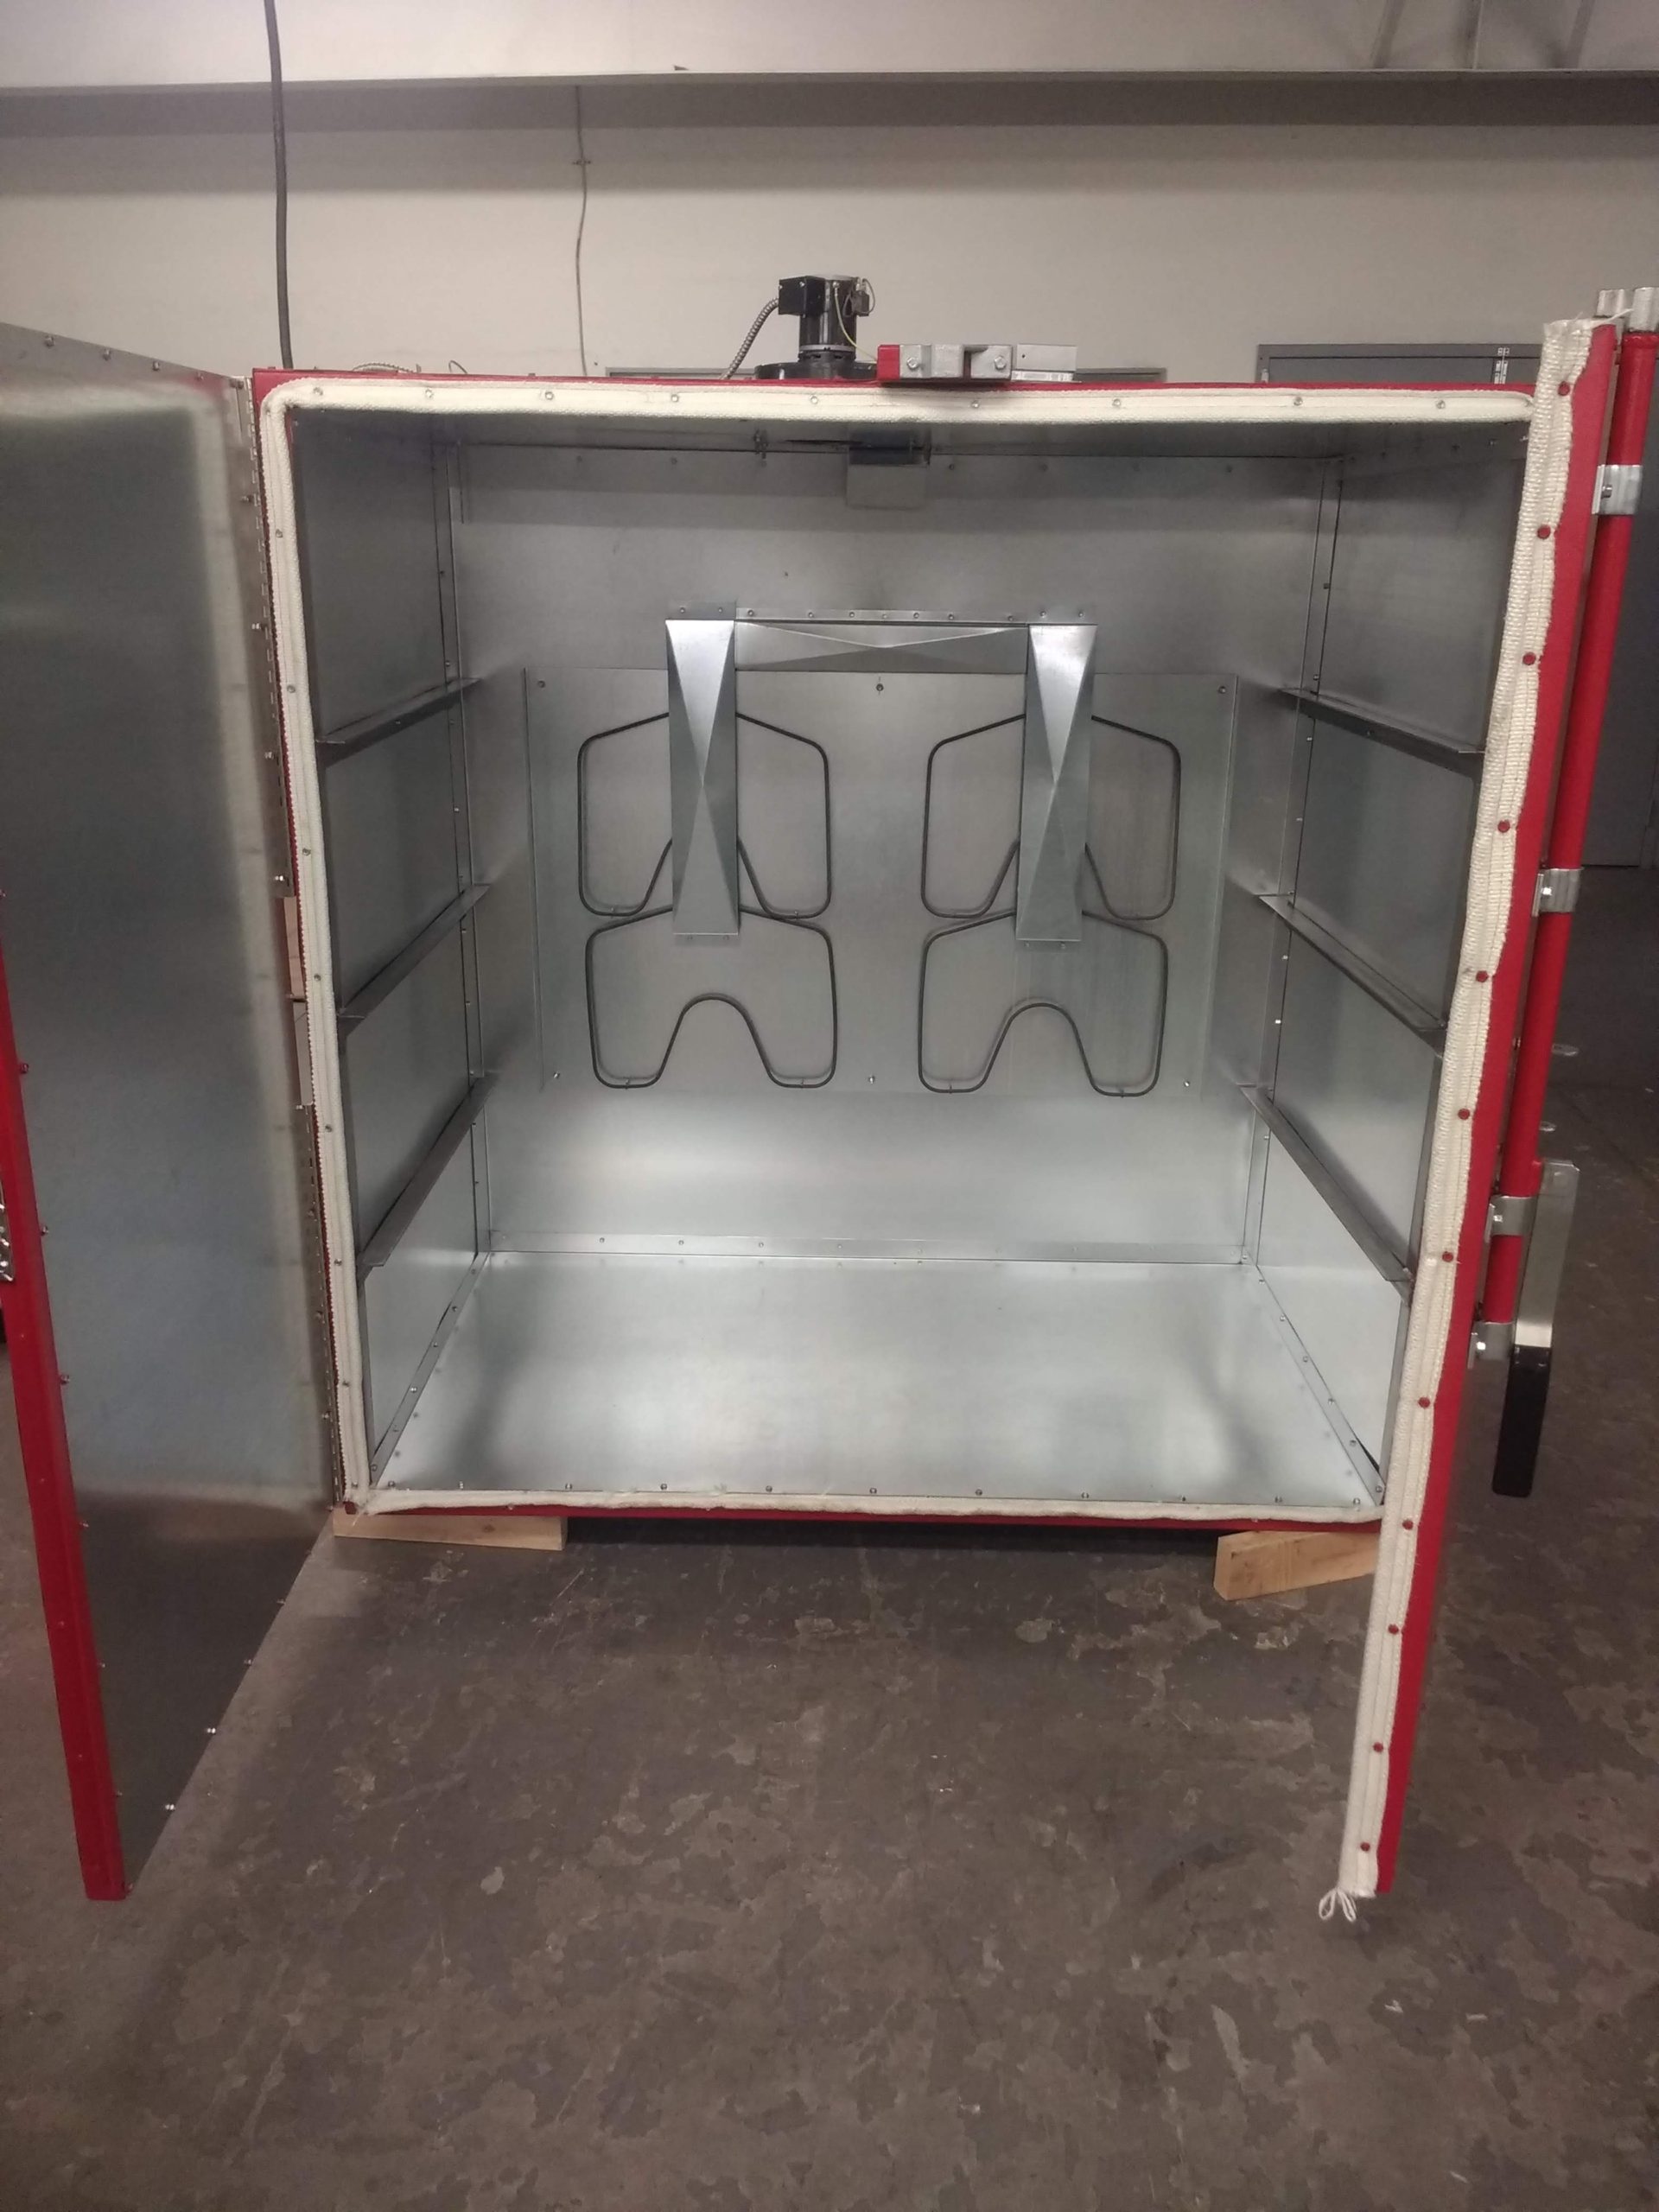 https://www.eptexcoatings.com/wp-content/uploads/2019/09/Deluxe-Shop-Oven-4-scaled.jpg